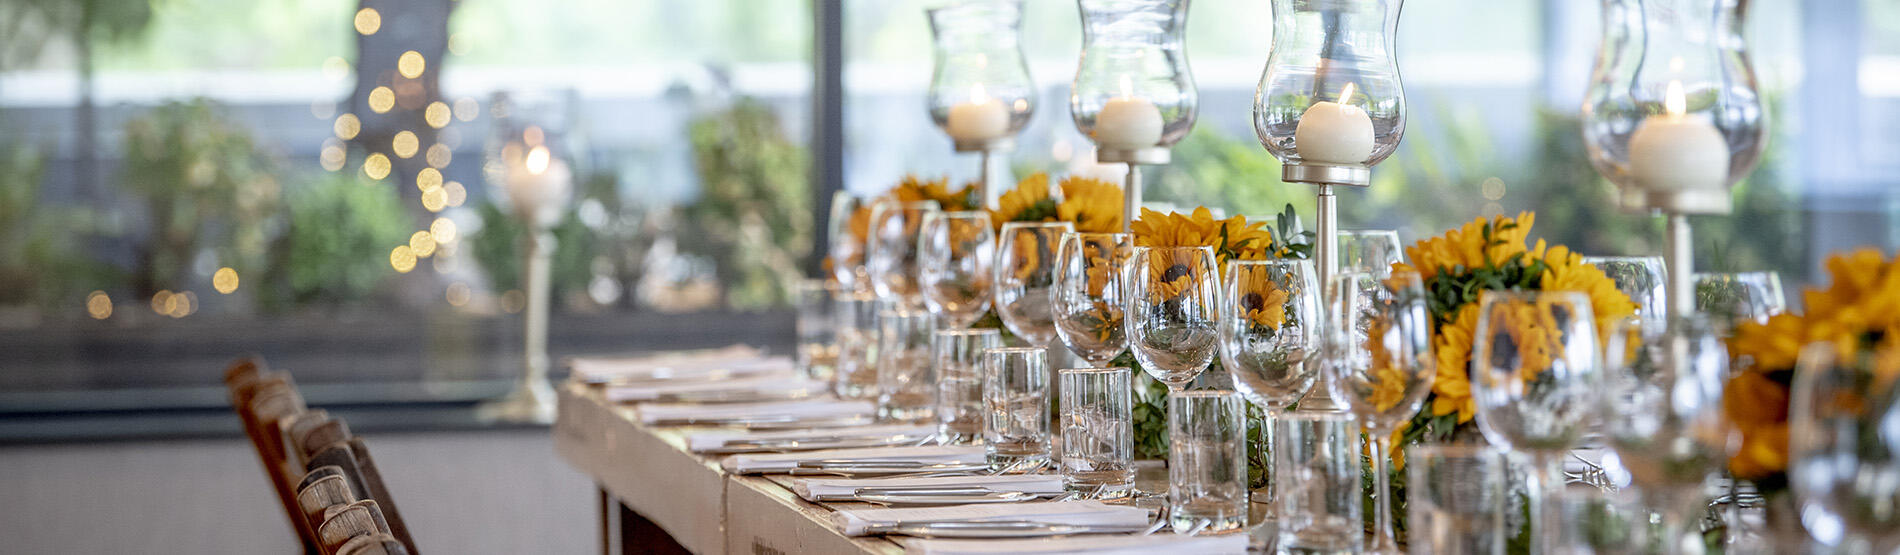 Long table with dinner setting and flowers